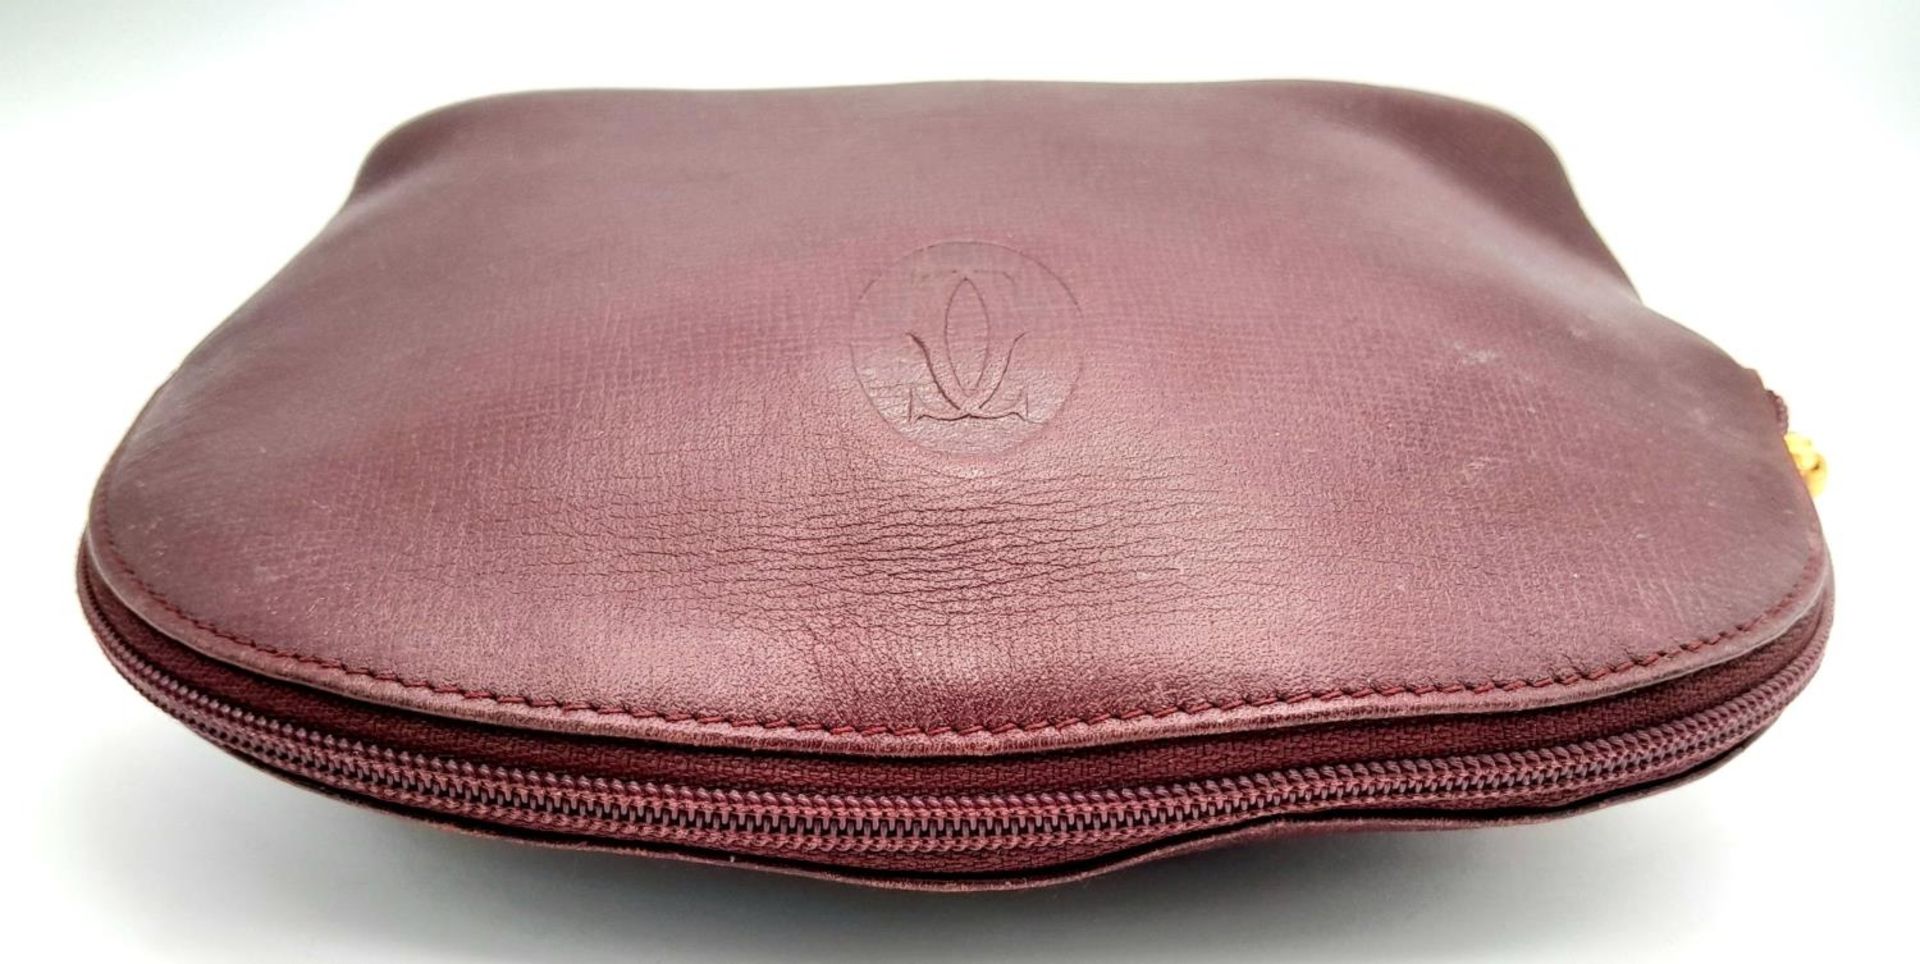 A Vintage Cartier Burgundy Pouch. Leather exterior with zip top closure. Burgundy canvas interior. - Image 4 of 11